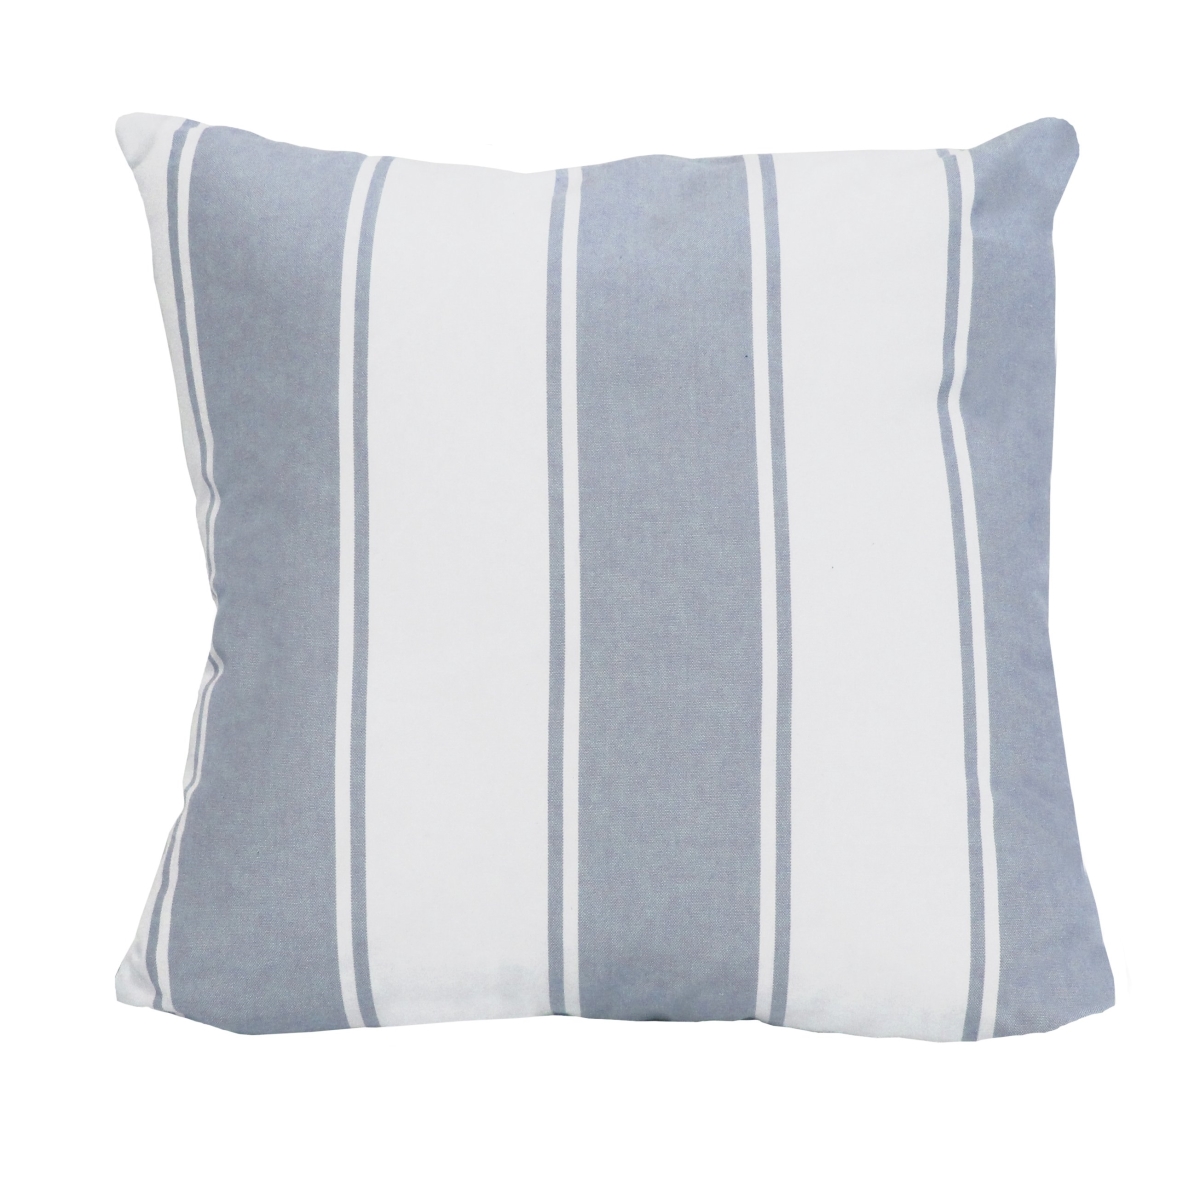 Home Roots Beddings 329331 Blue Stripe Pillow